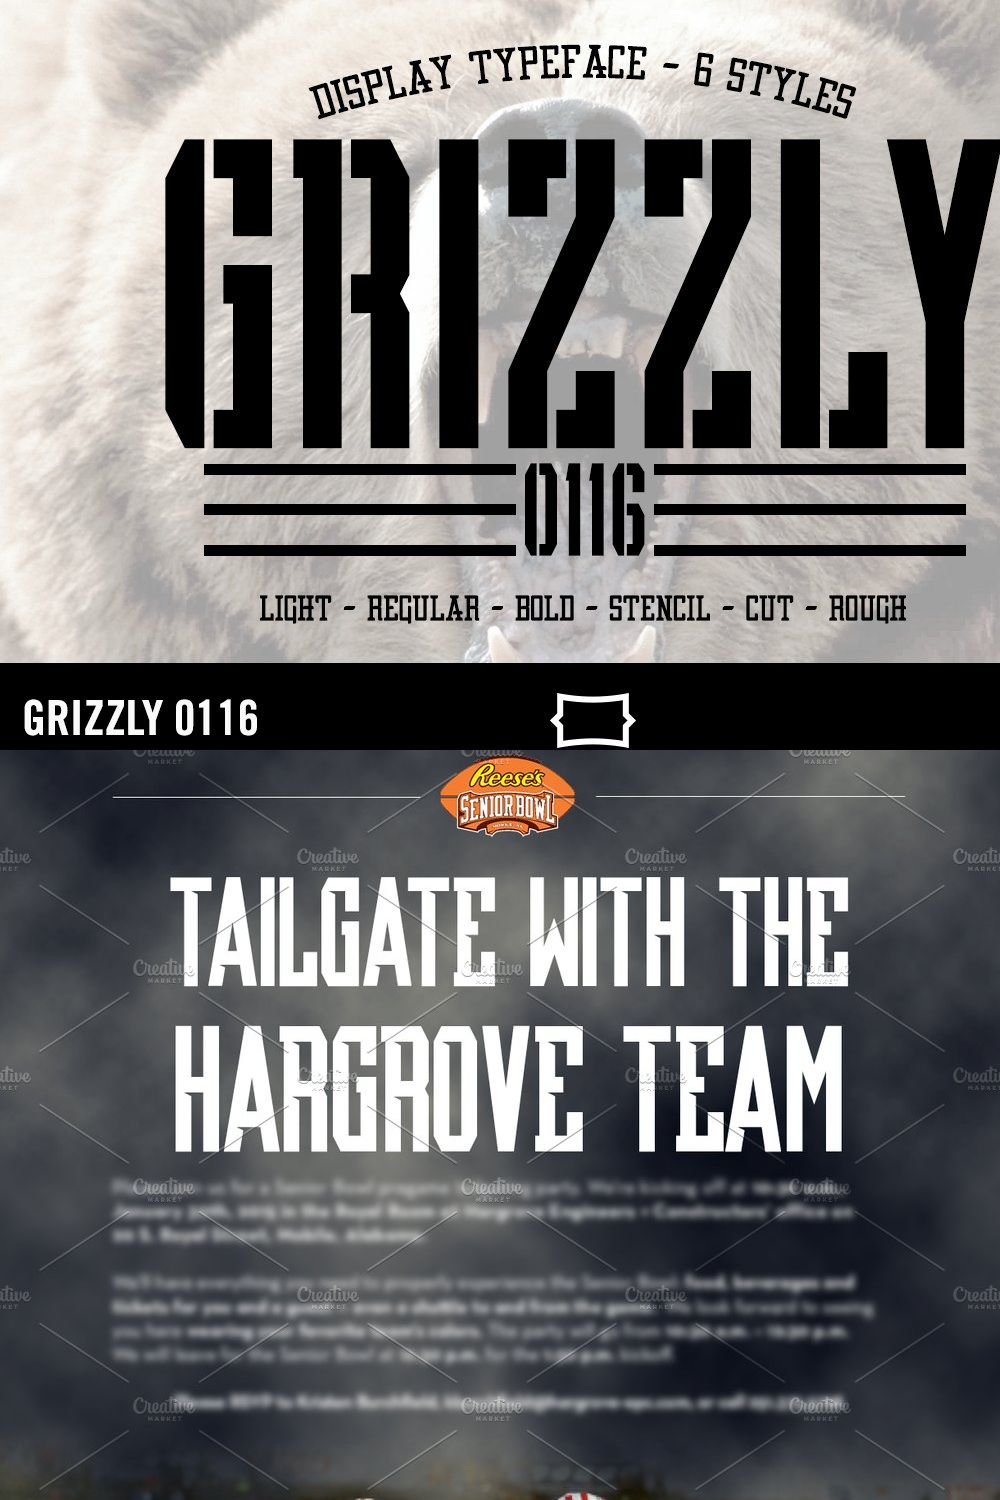 Grizzly 0116 Display Typeface pinterest preview image.